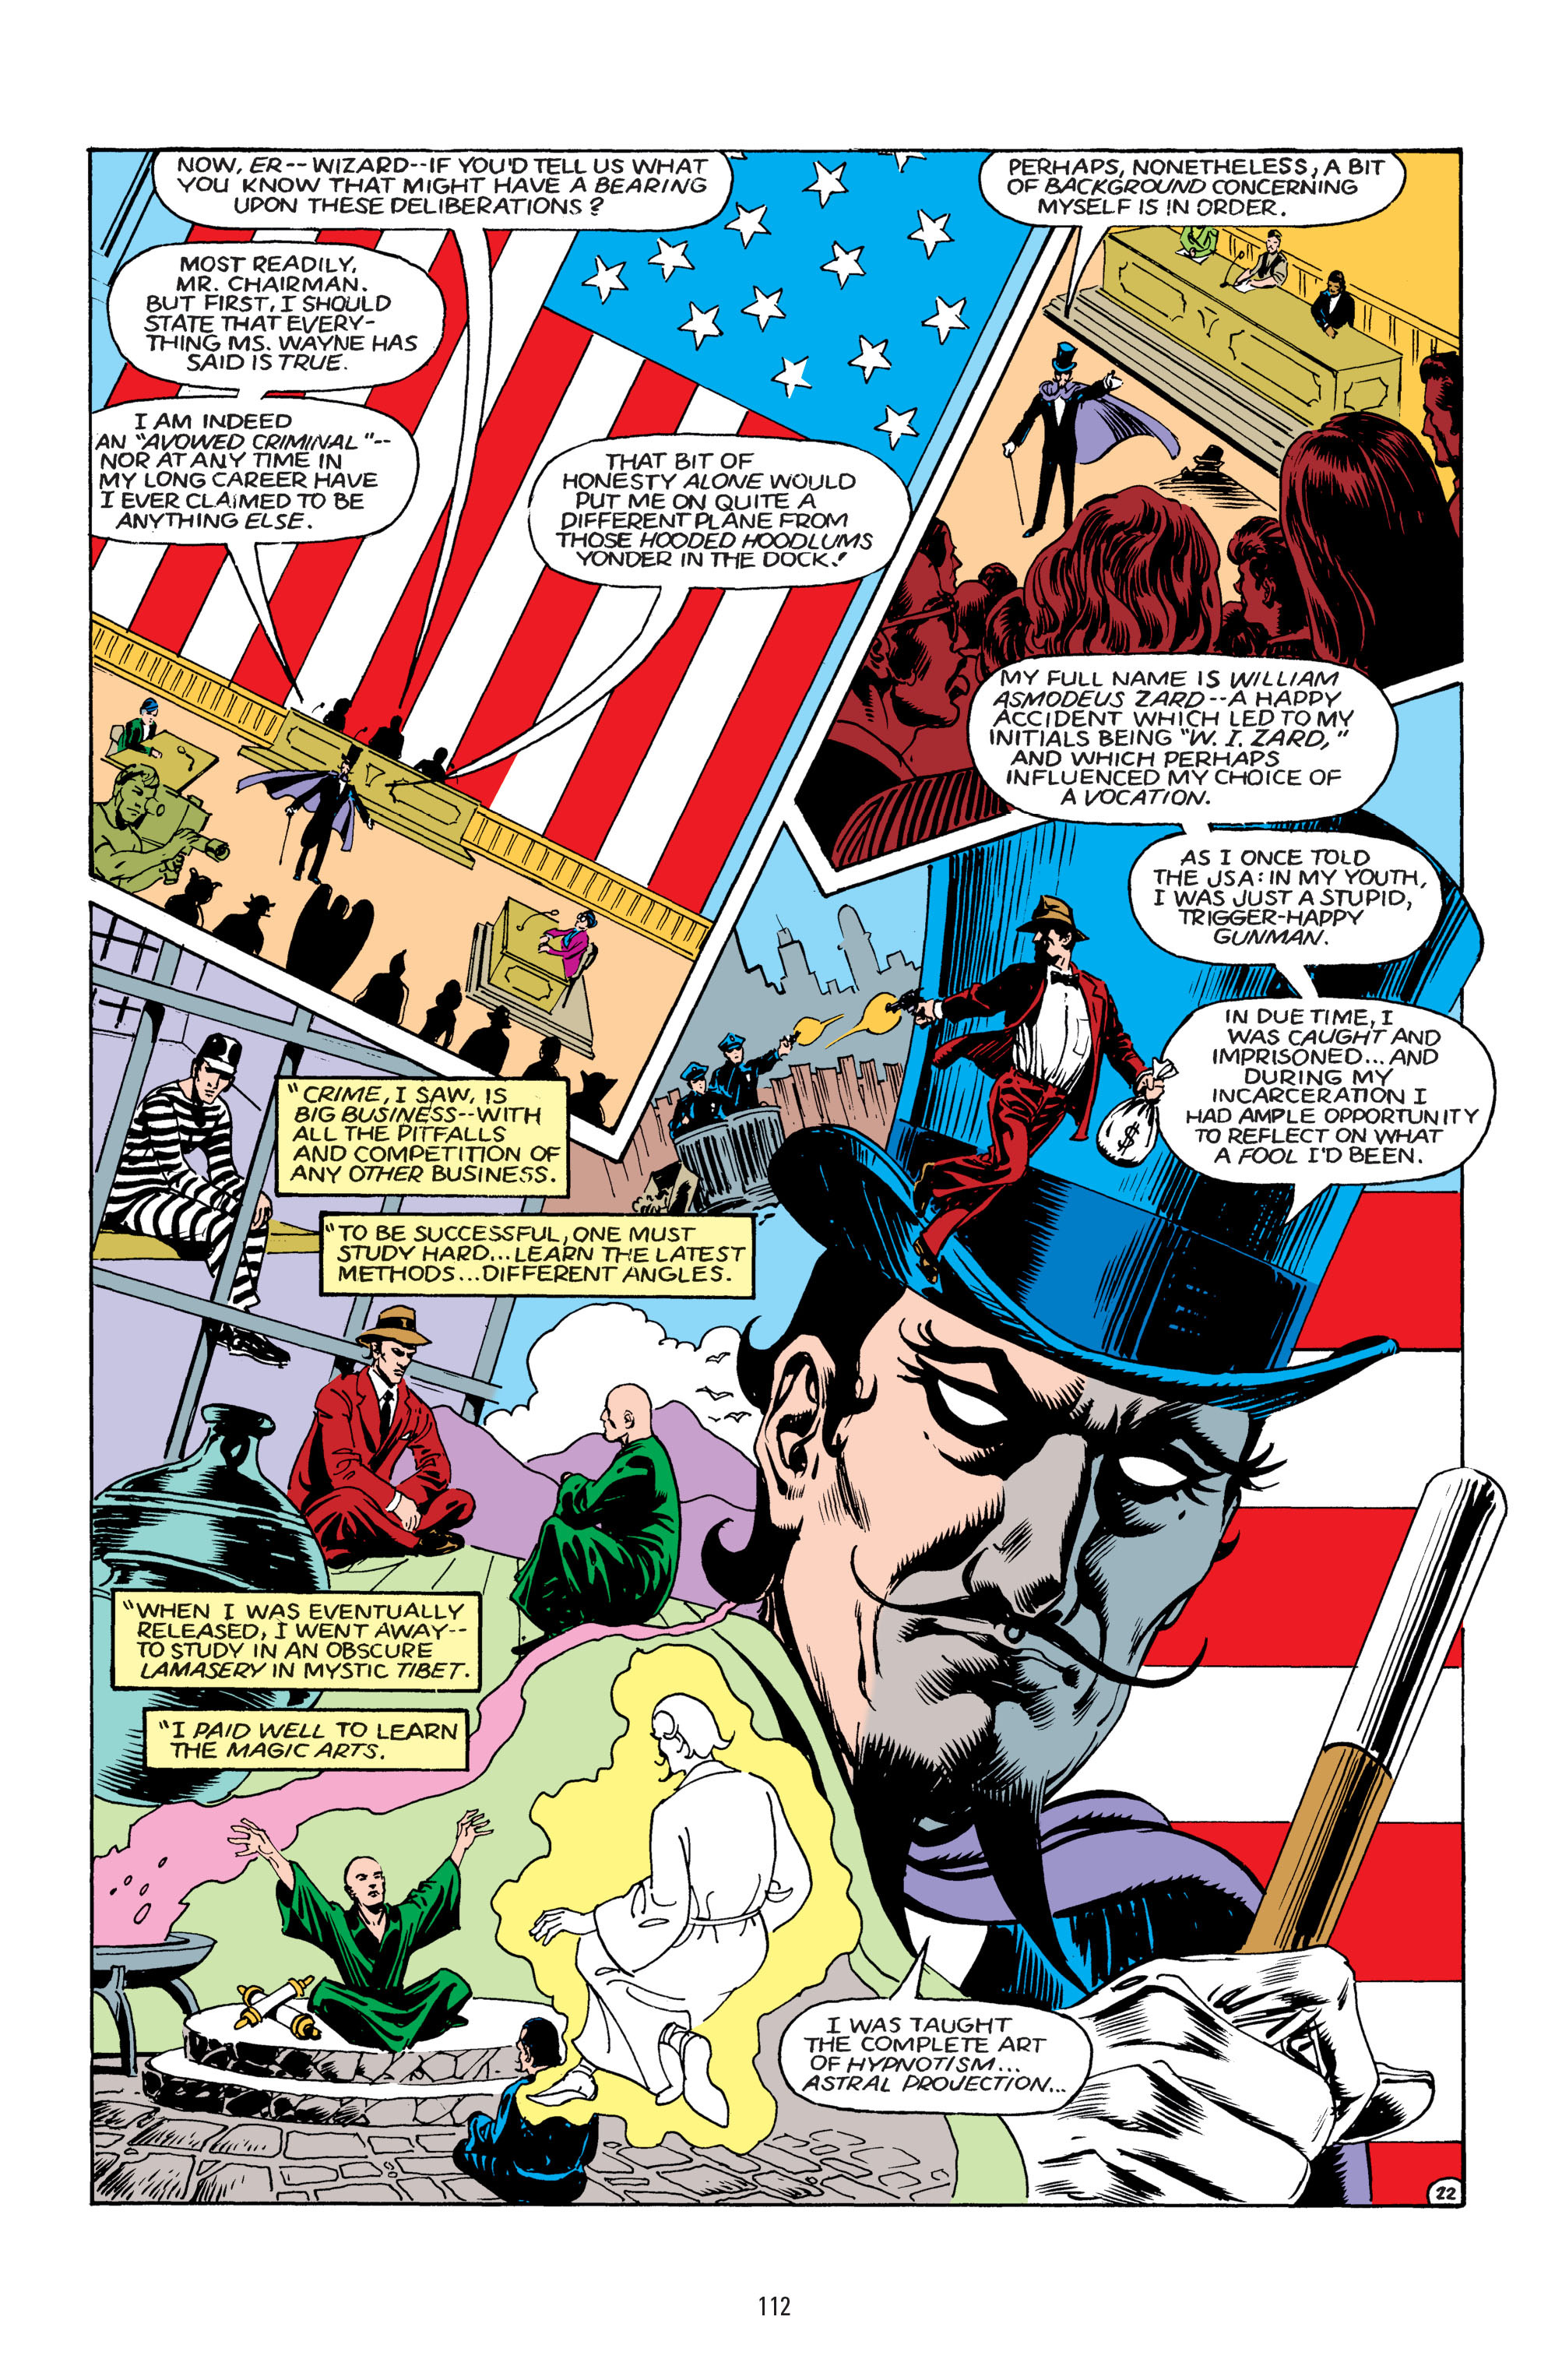 Read online America vs. the Justice Society comic -  Issue # TPB - 108